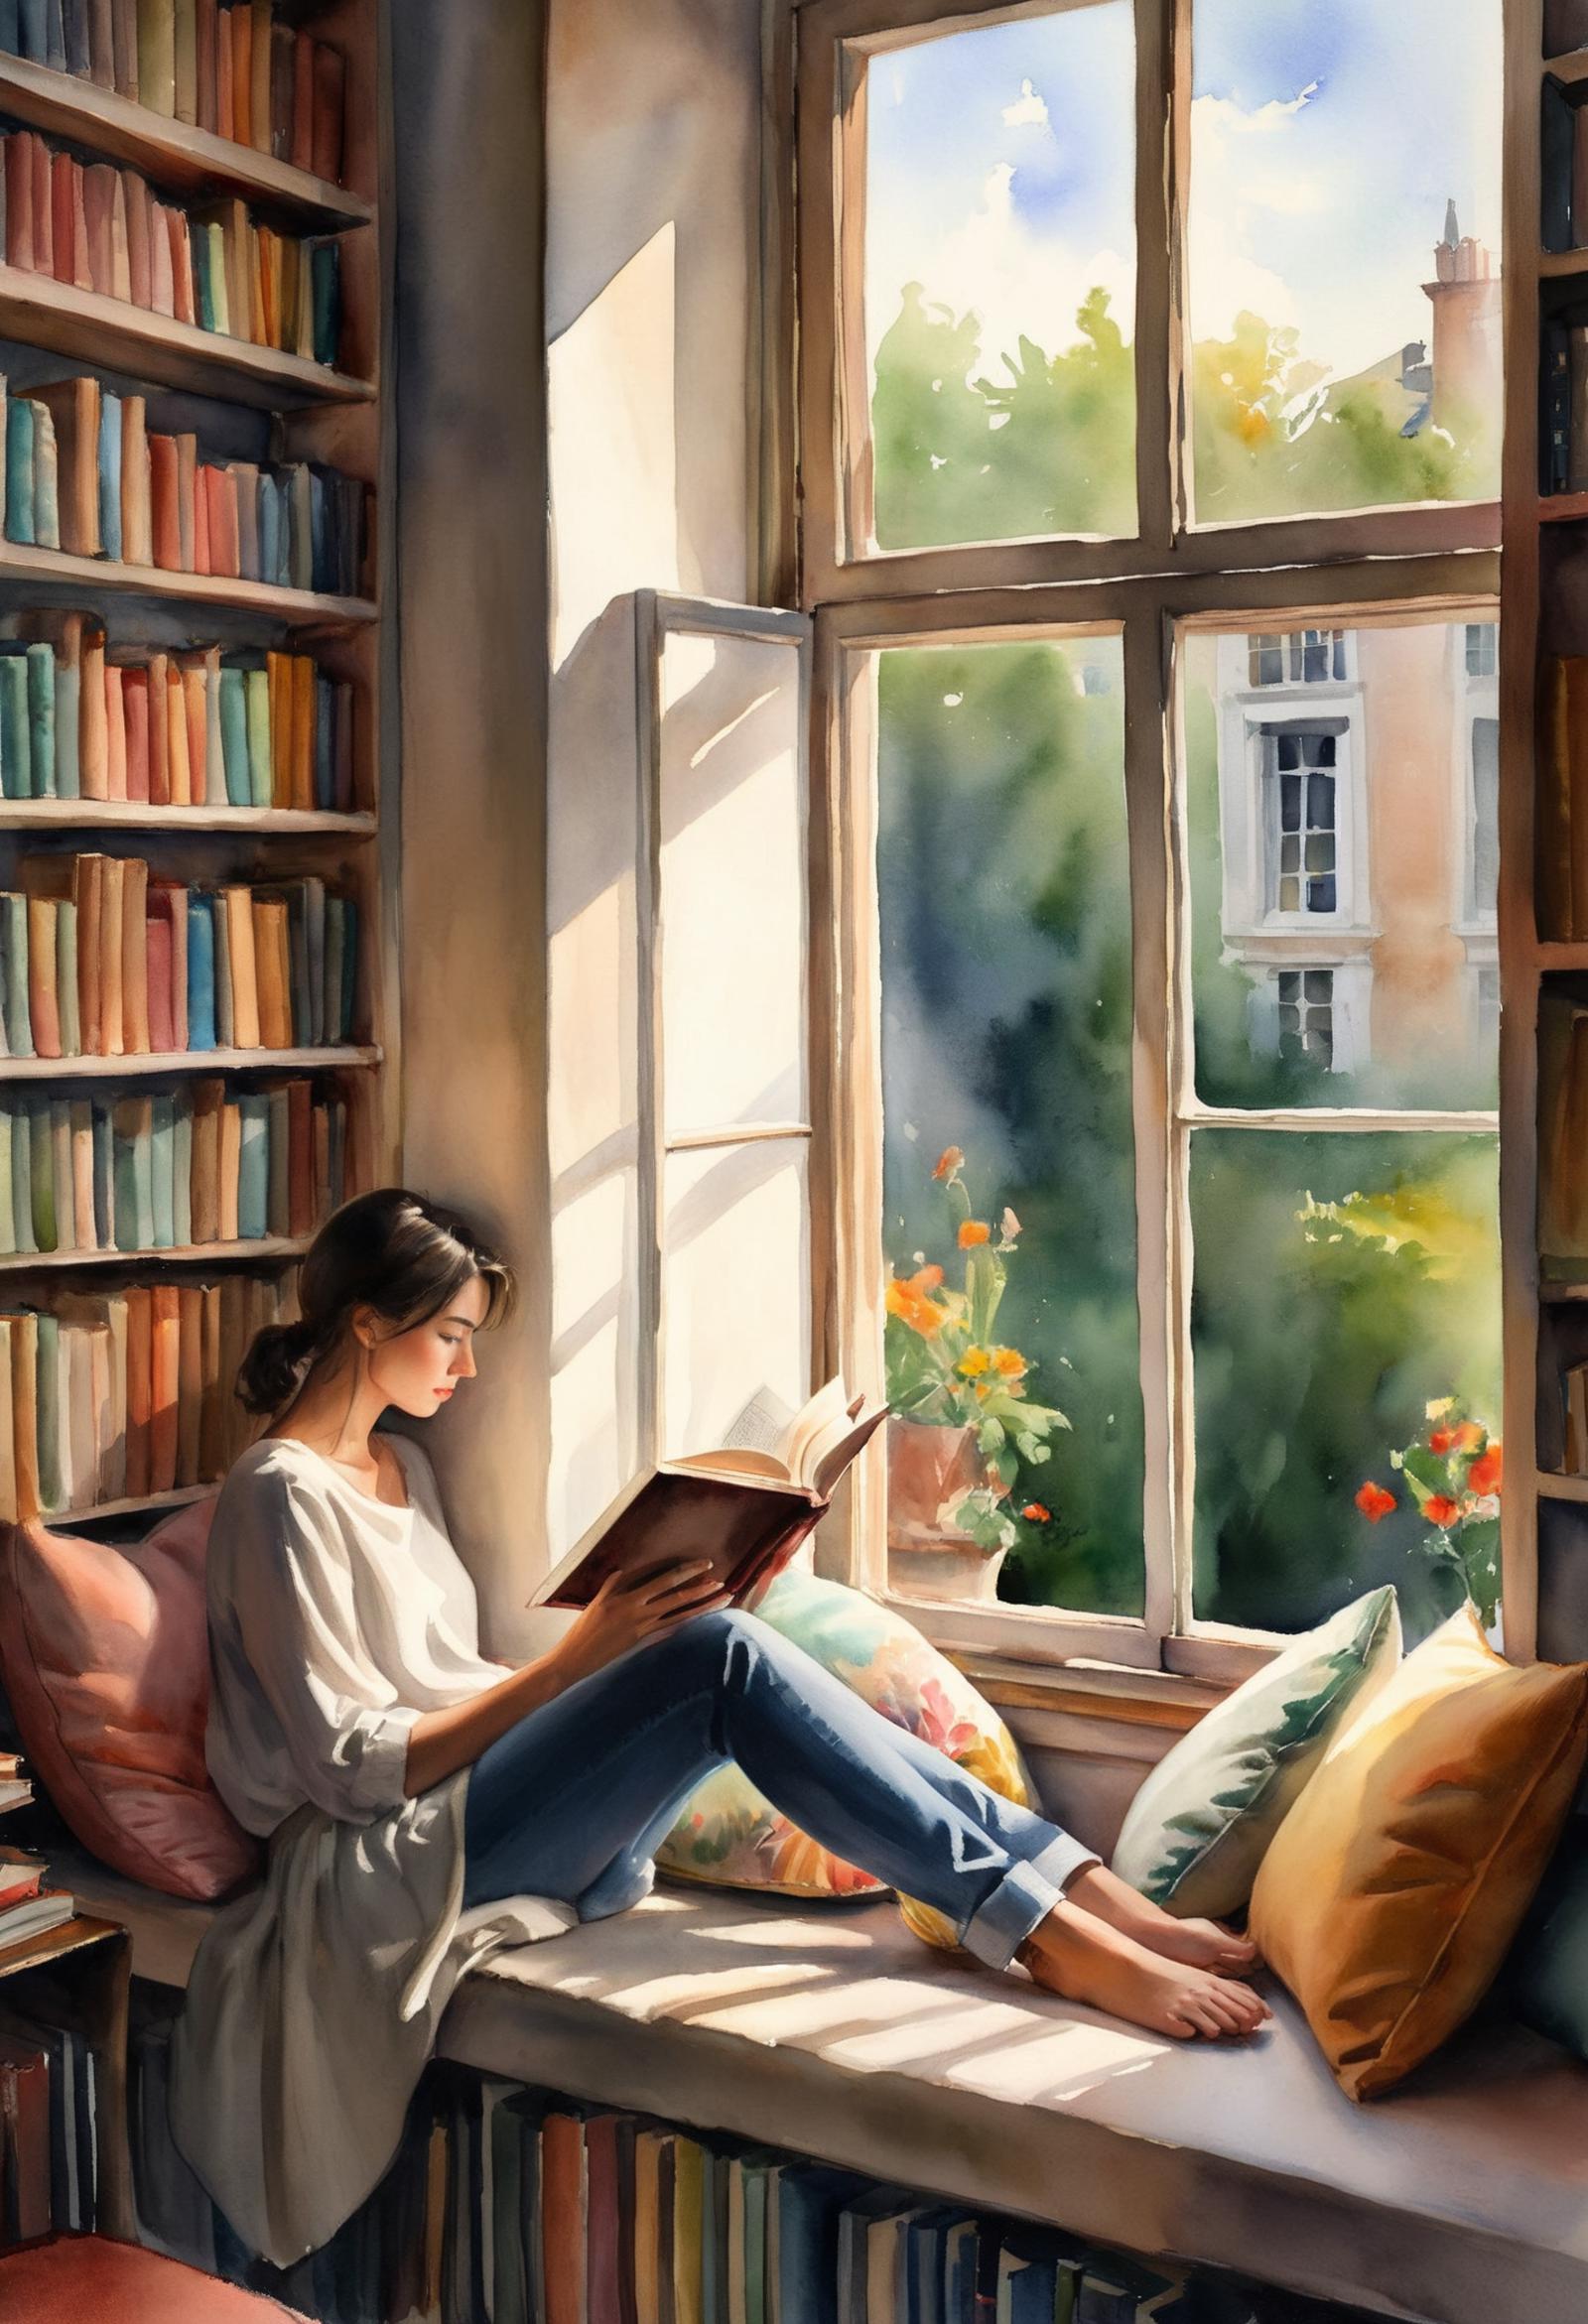 Woman Reading Book in a Comfortable Setting with a Window and Books Around Her